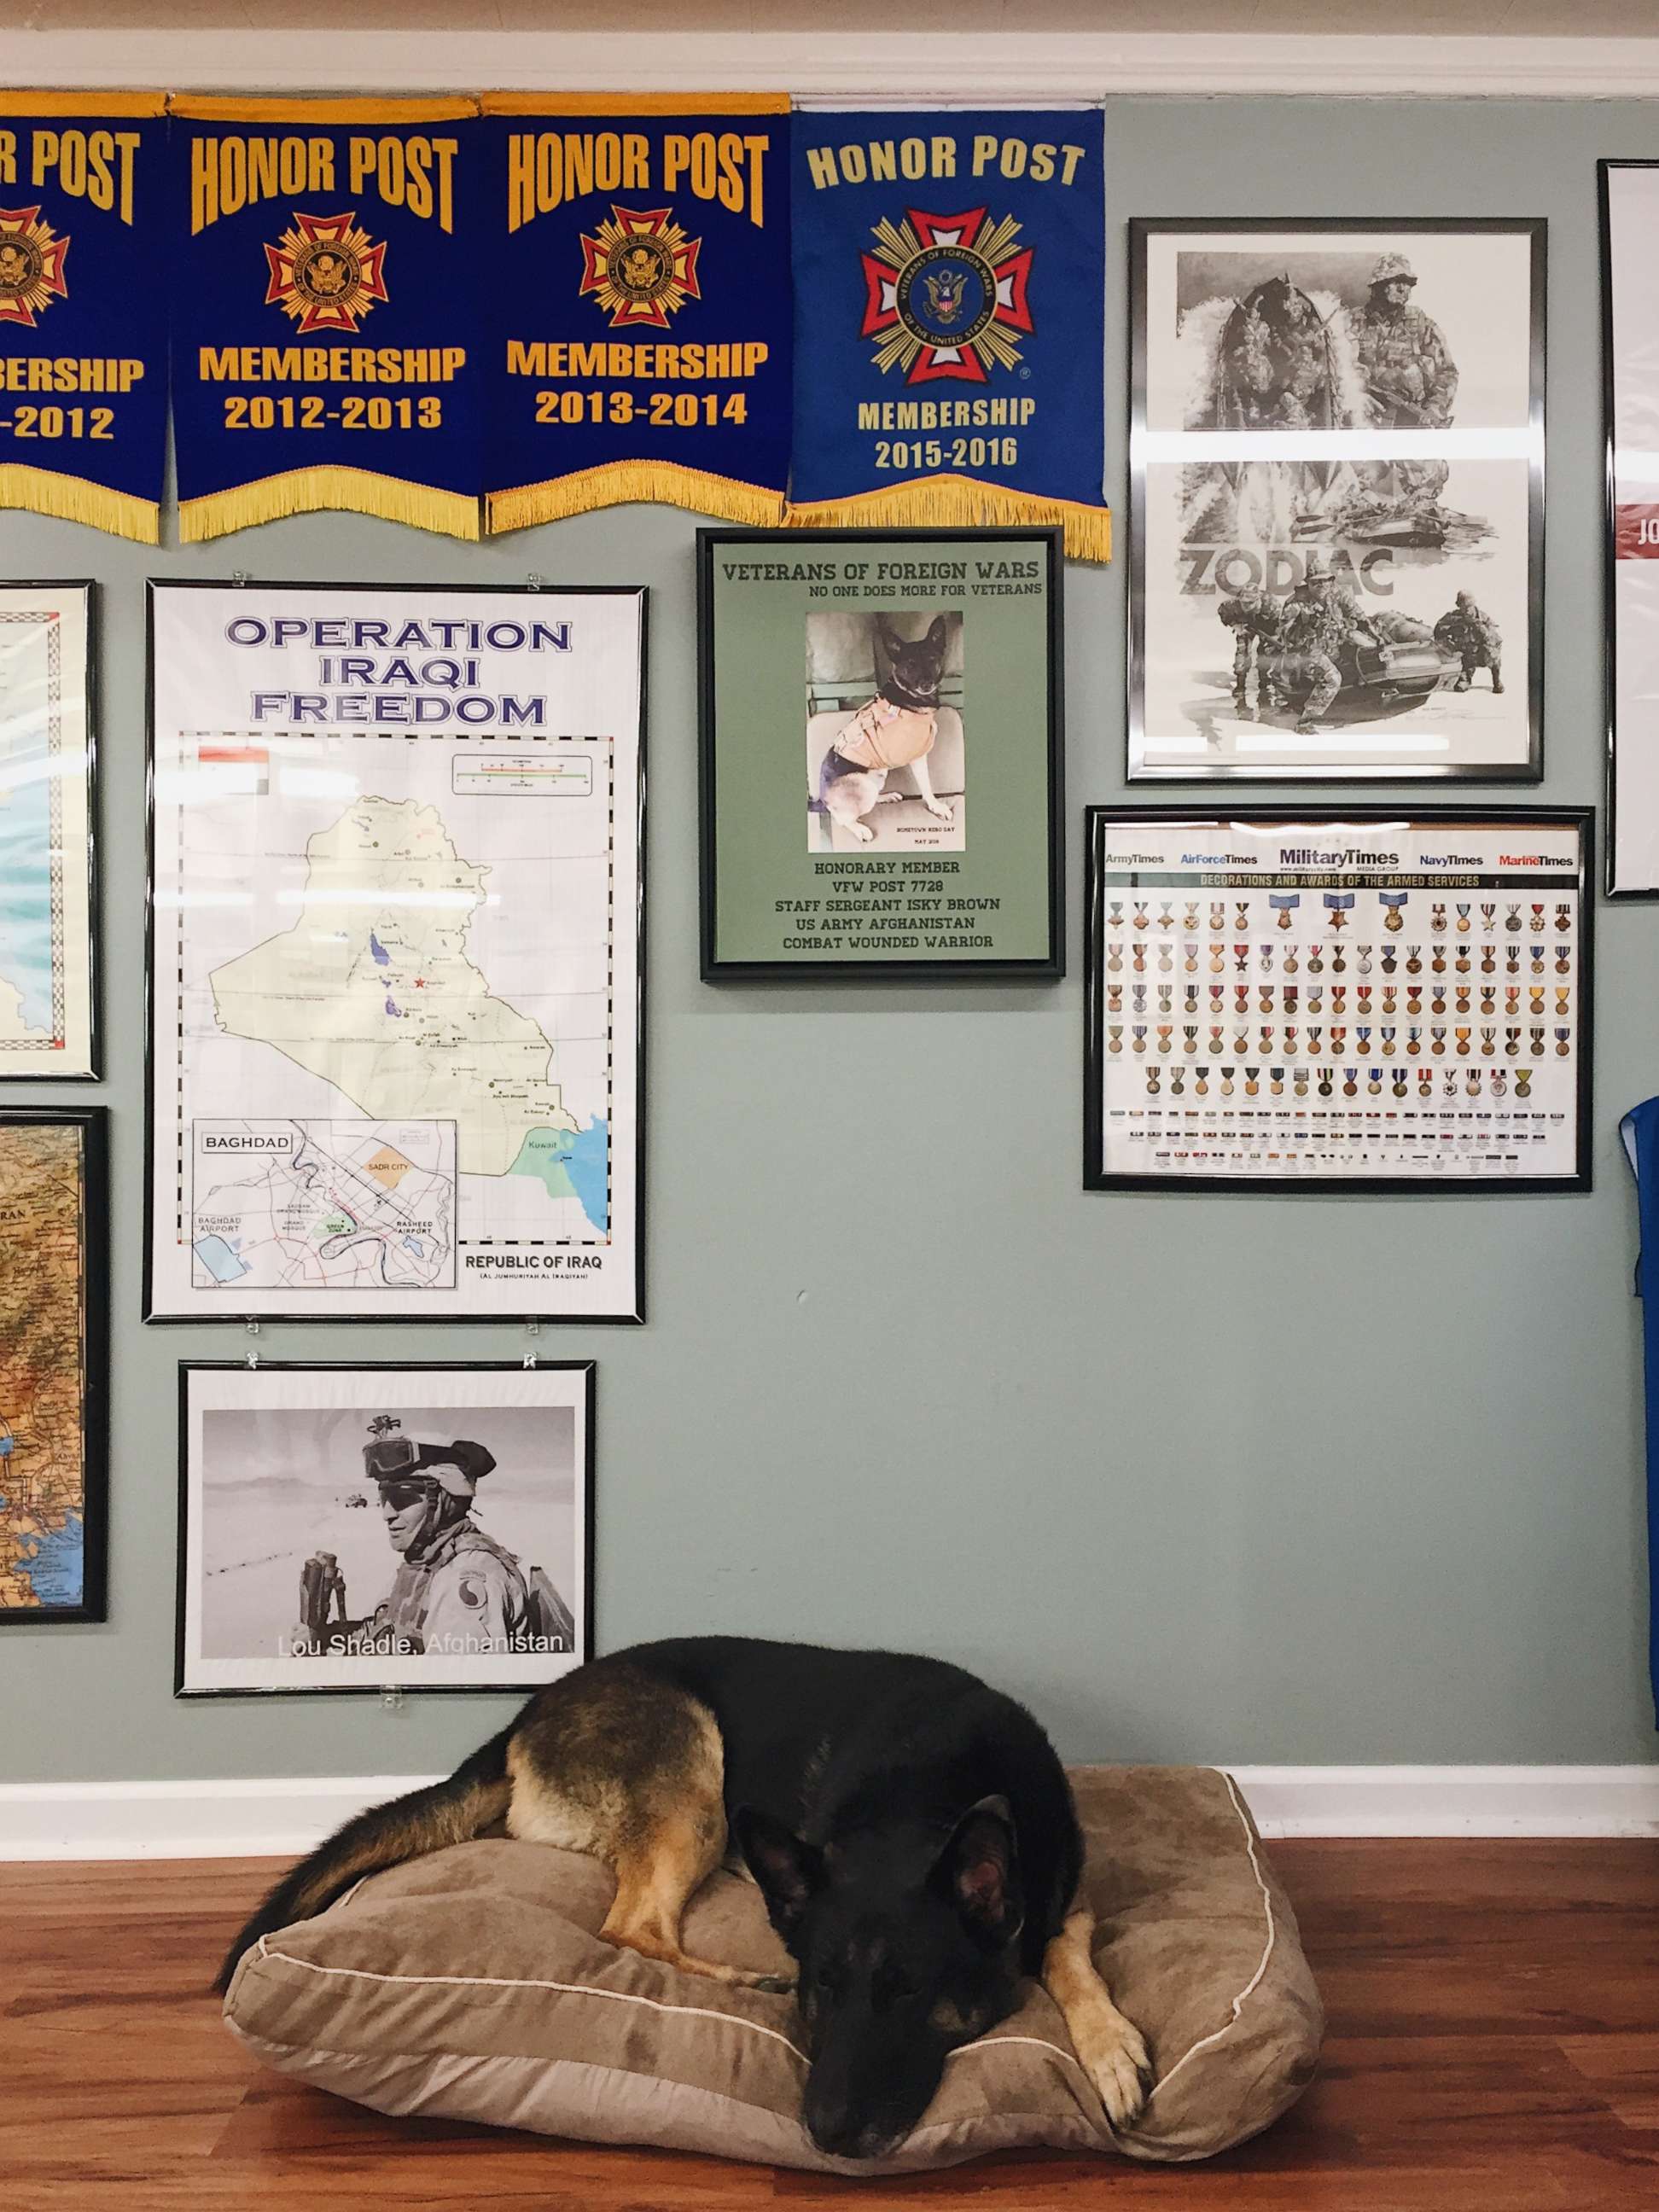 PHOTO: Isky Brown resting at VFW Post 7728 in Morrisville, VA. 